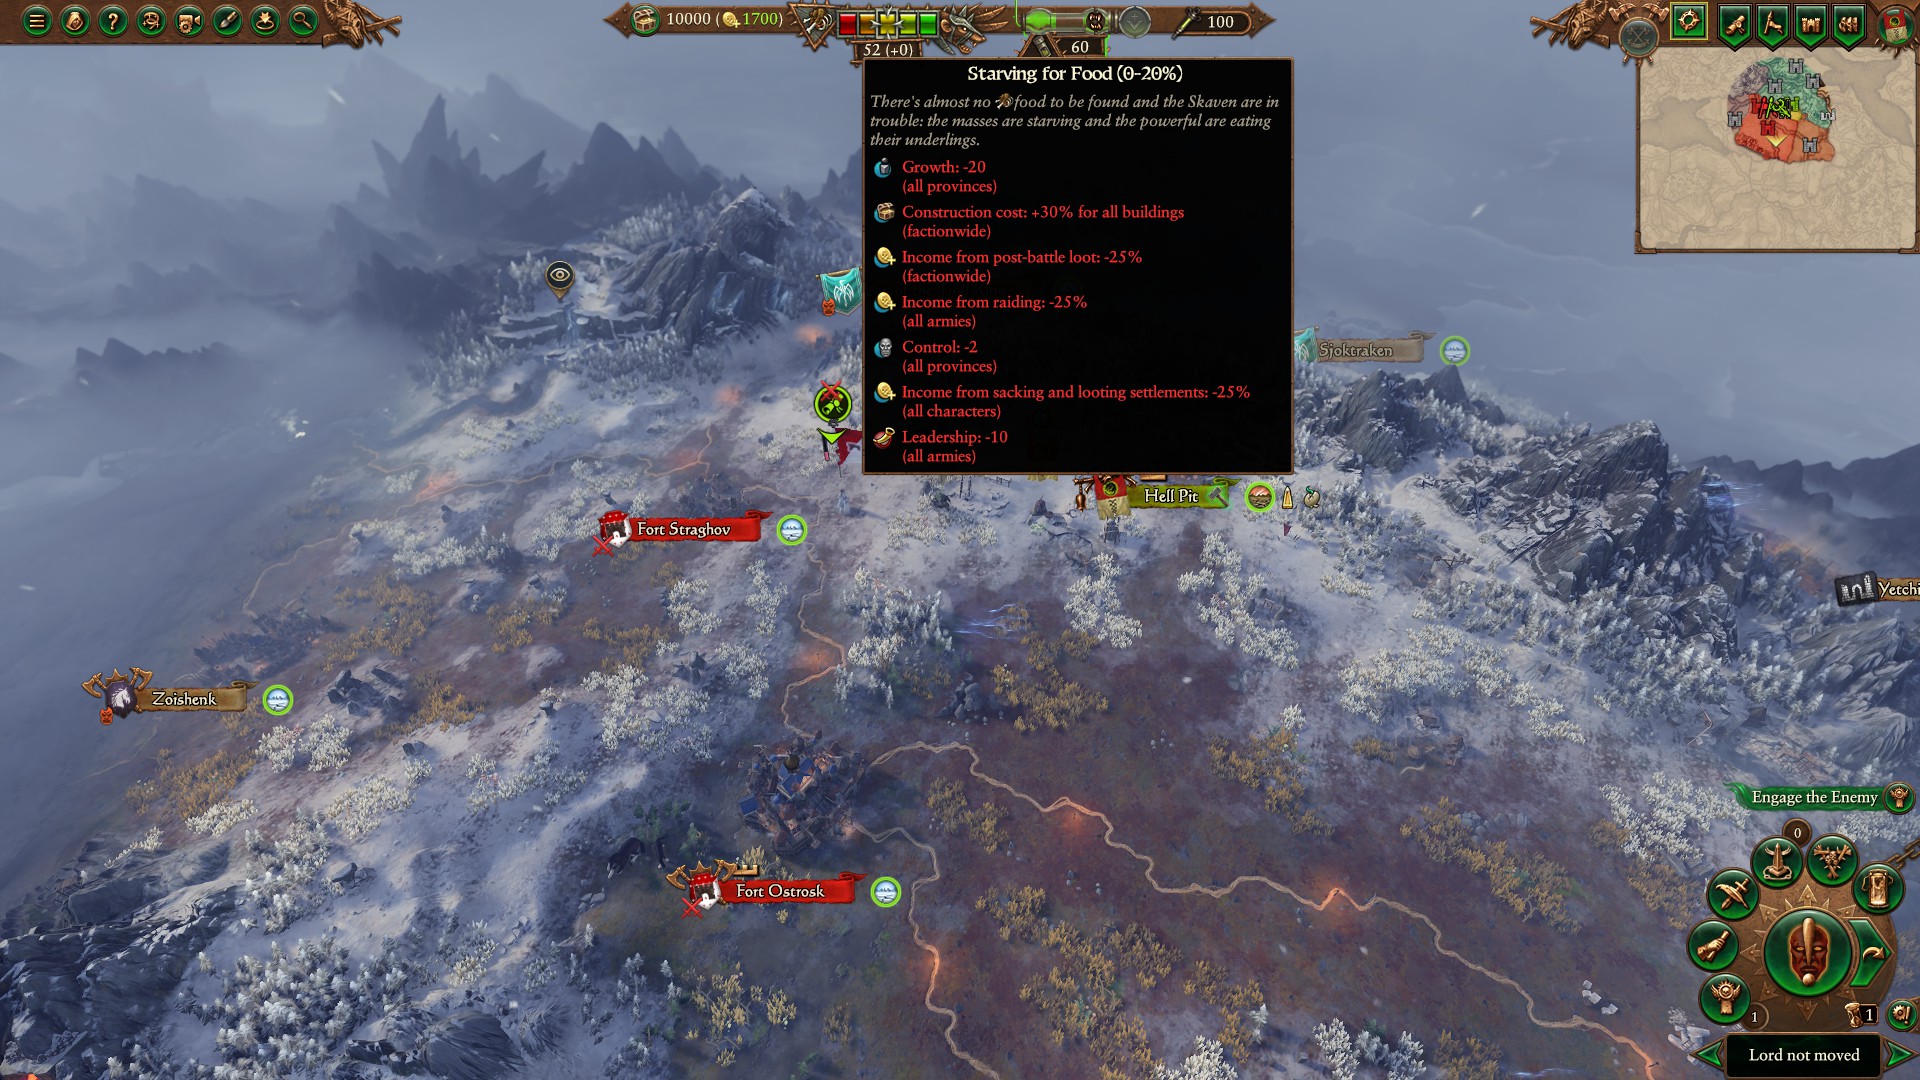 Total War: Warhammer 3 Immortal Empires Throt - Skaven campaign overview, guide and second thoughts image 3